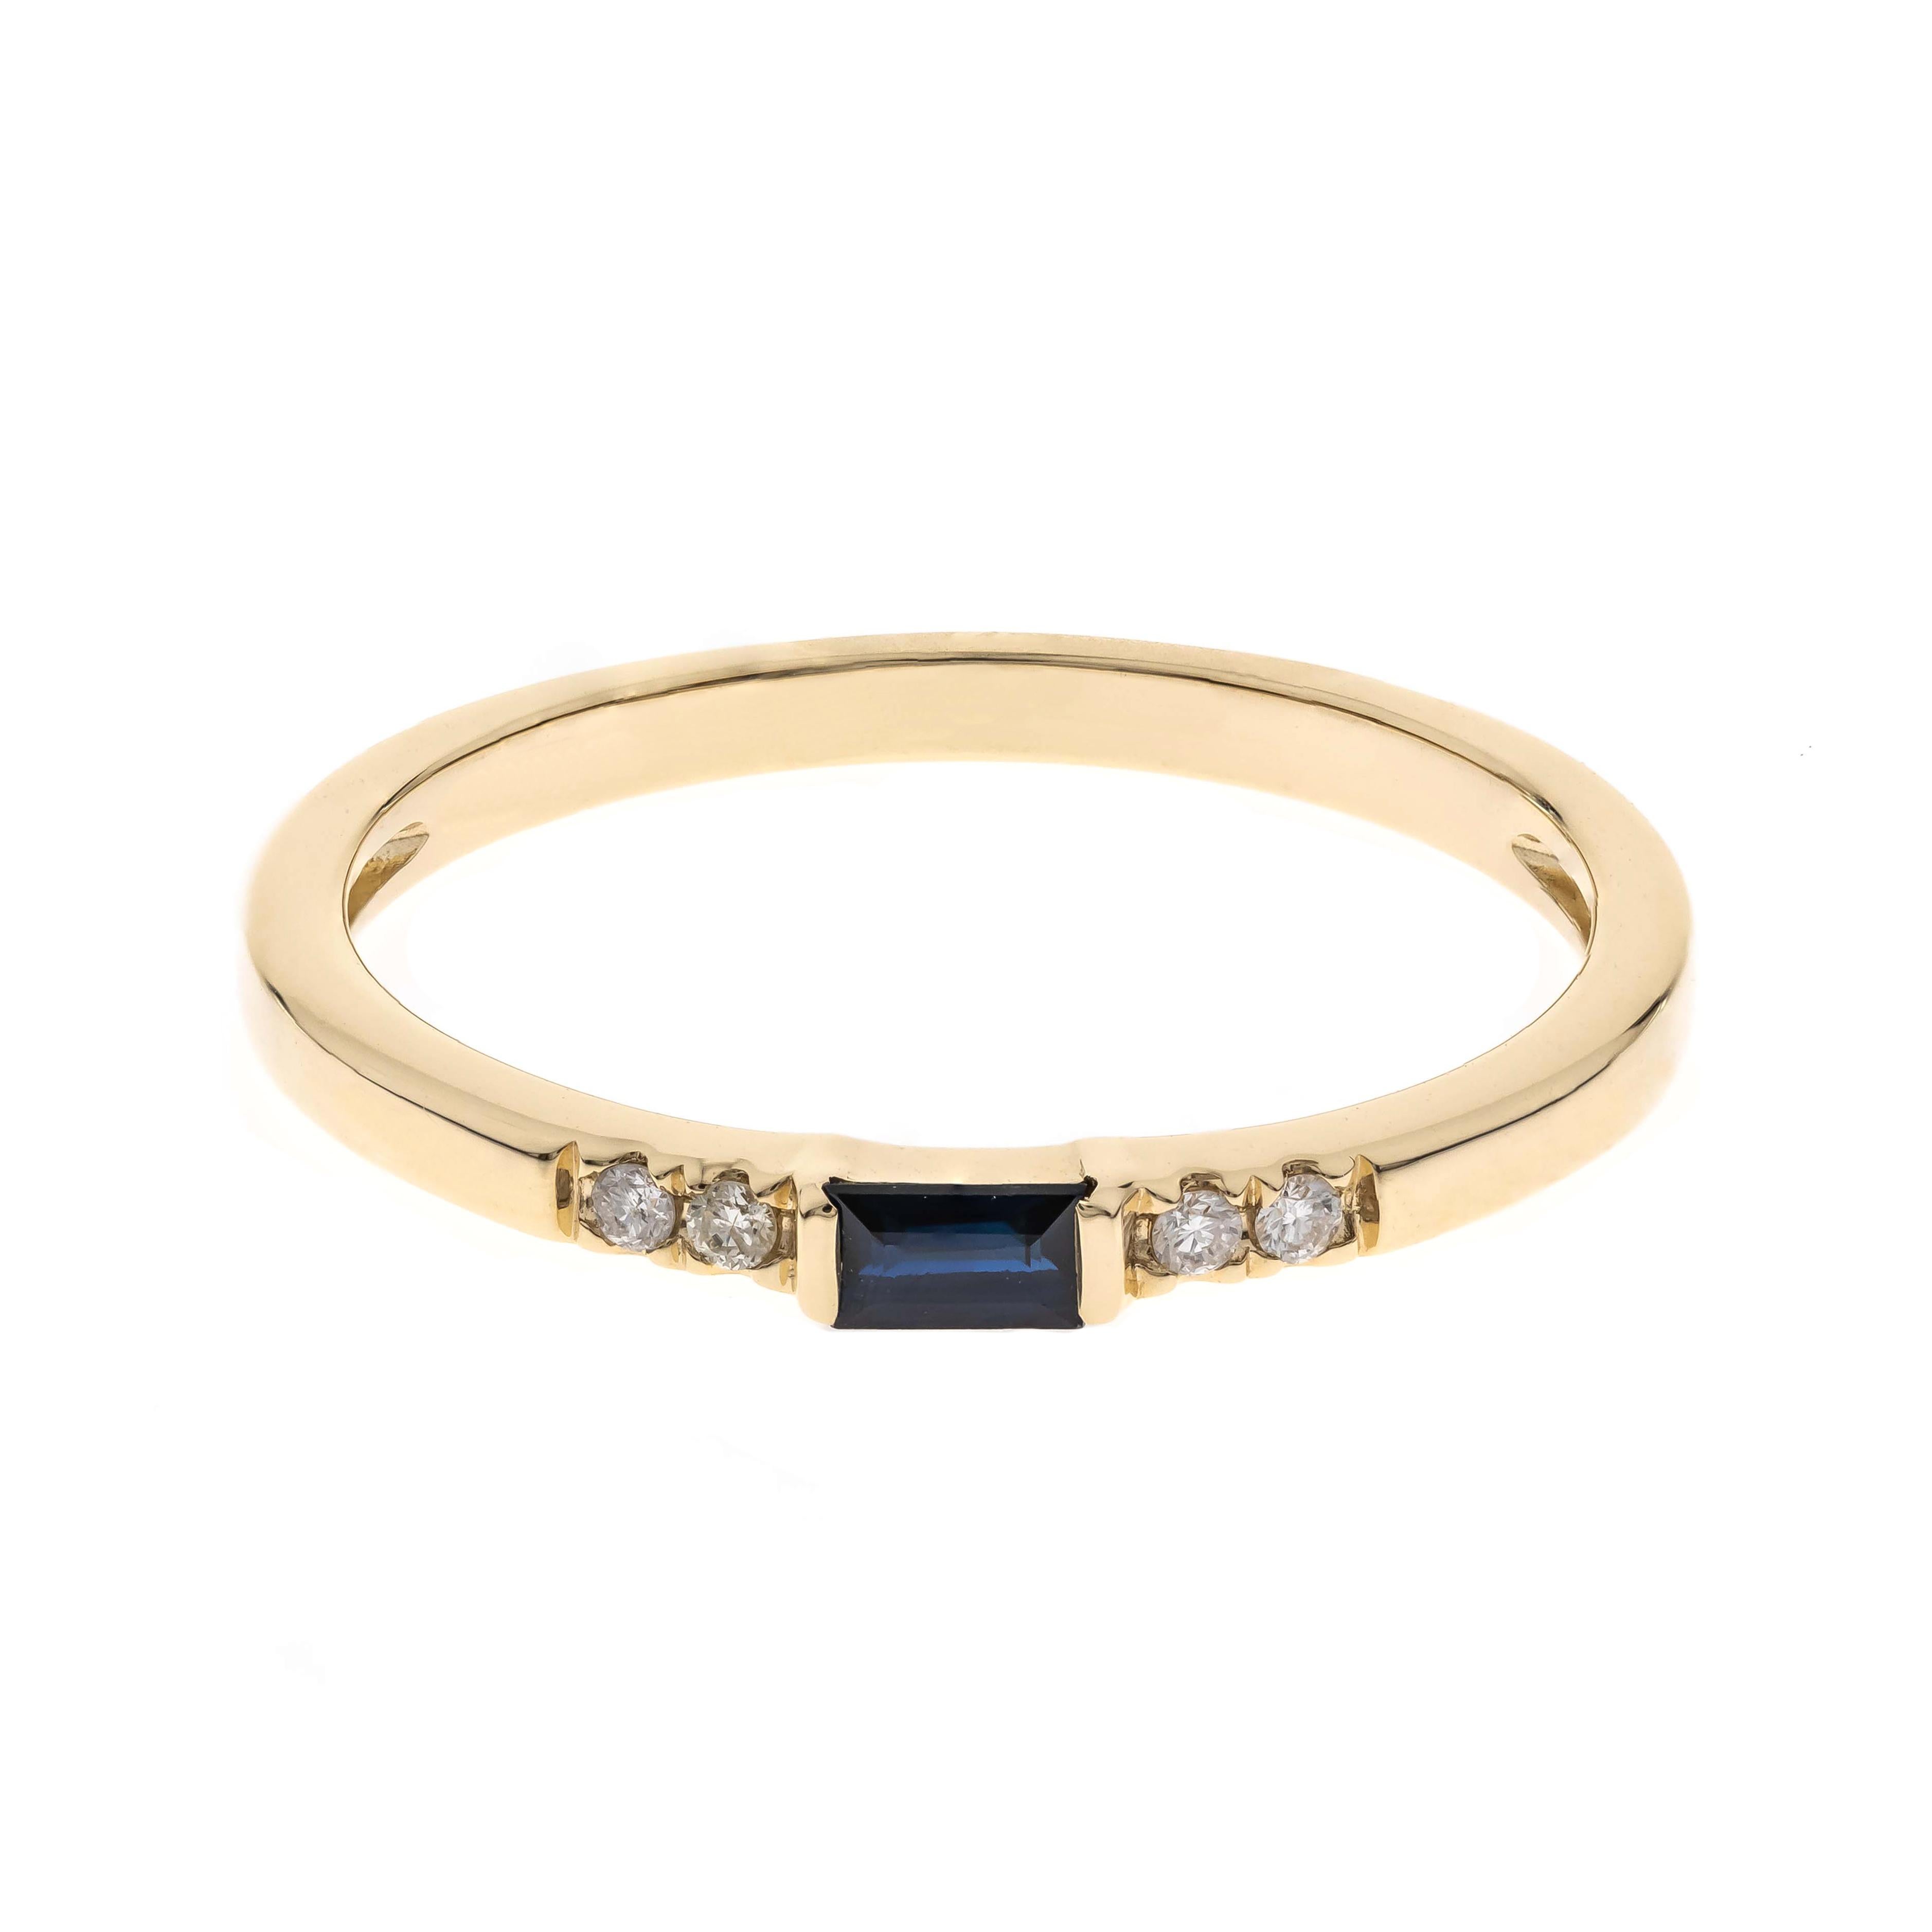 Stunning, timeless and classy eternity Unique Ring. Decorate yourself in luxury with this Gin & Grace Ring. The 14K Yellow Gold jewelry boasts 3.5x2 mm (1 pcs) 0.12 carat Baguette-Cut Blue Sapphire, along with Natural Round-cut white Diamond (4 Pcs)